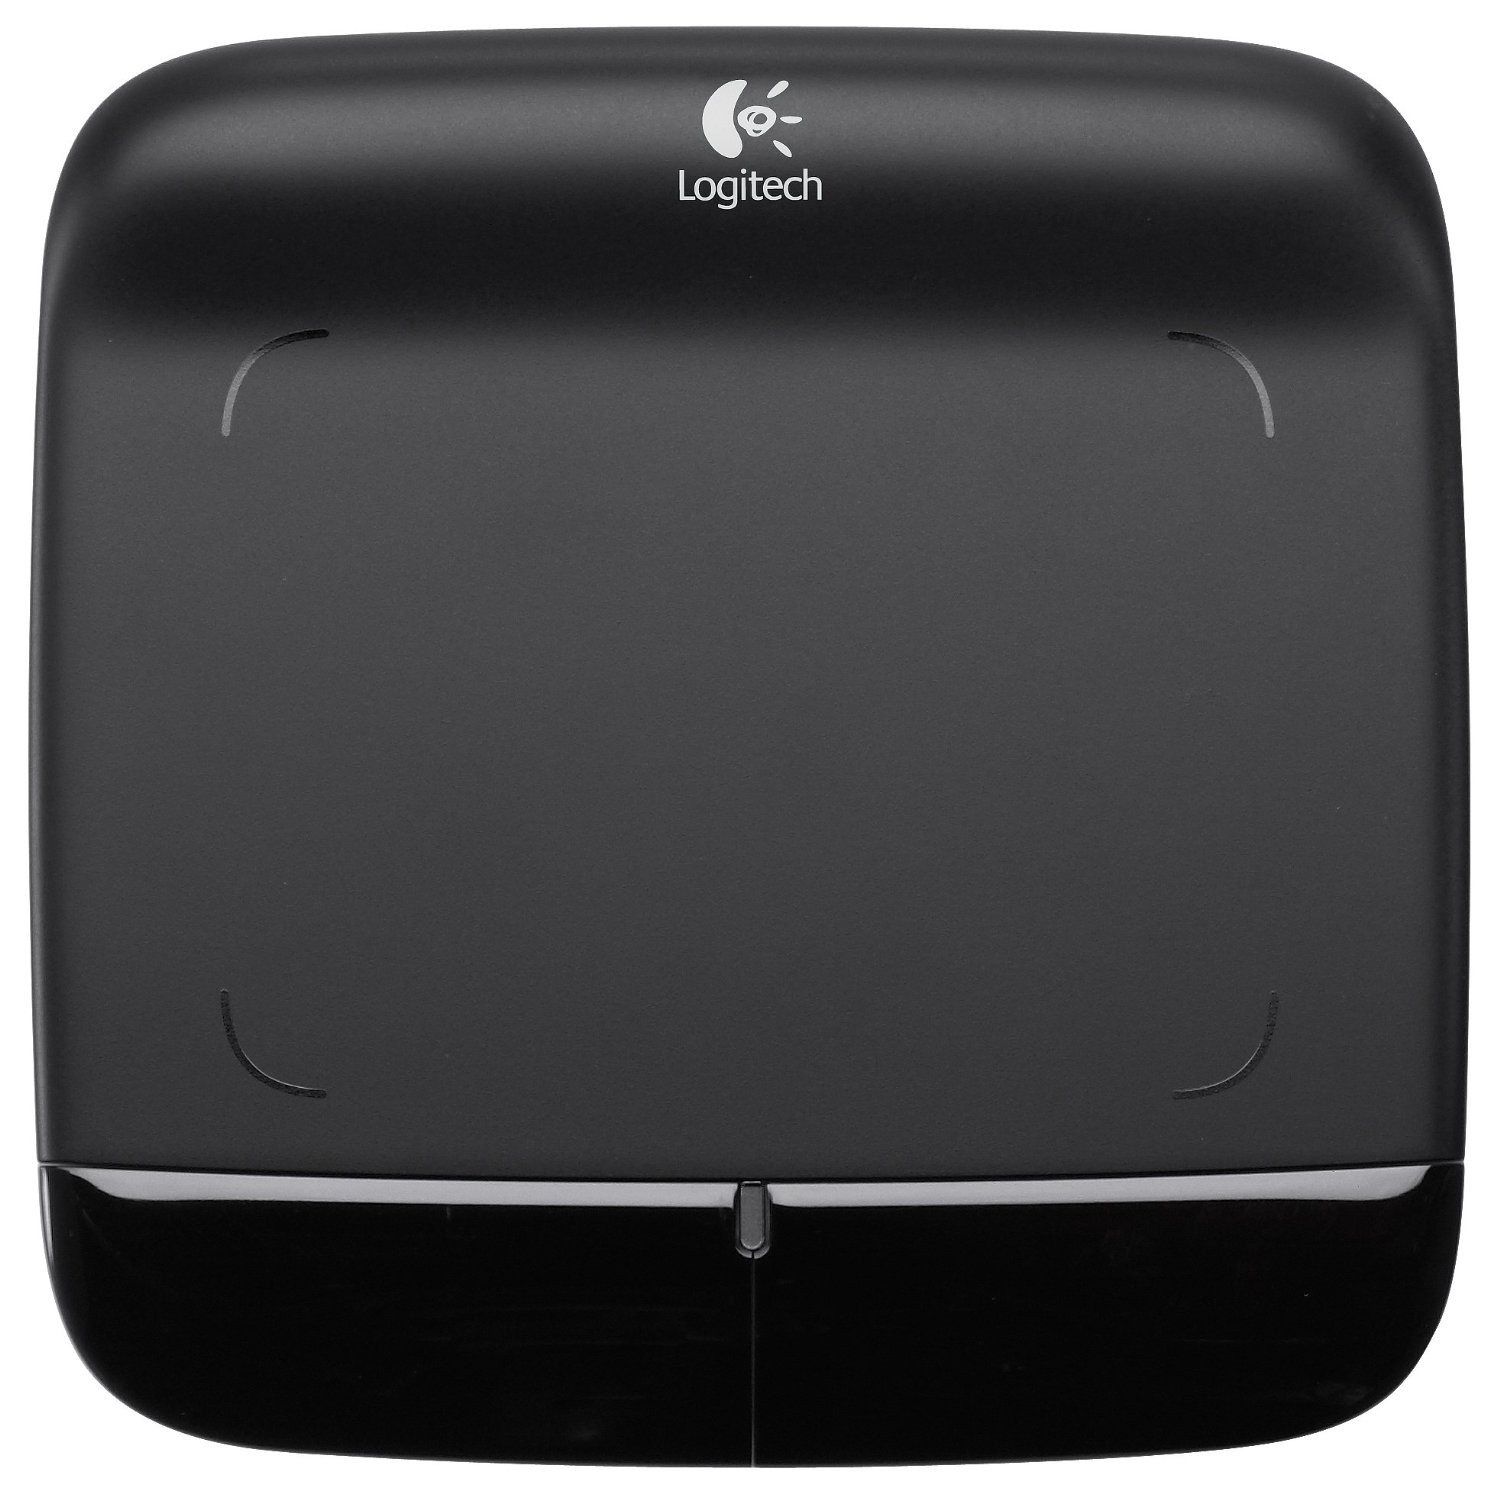 http://thetechjournal.com/wp-content/uploads/images/1201/1326941814-logitech-wireless-touchpad-with-multitouch-navigation-1.jpg